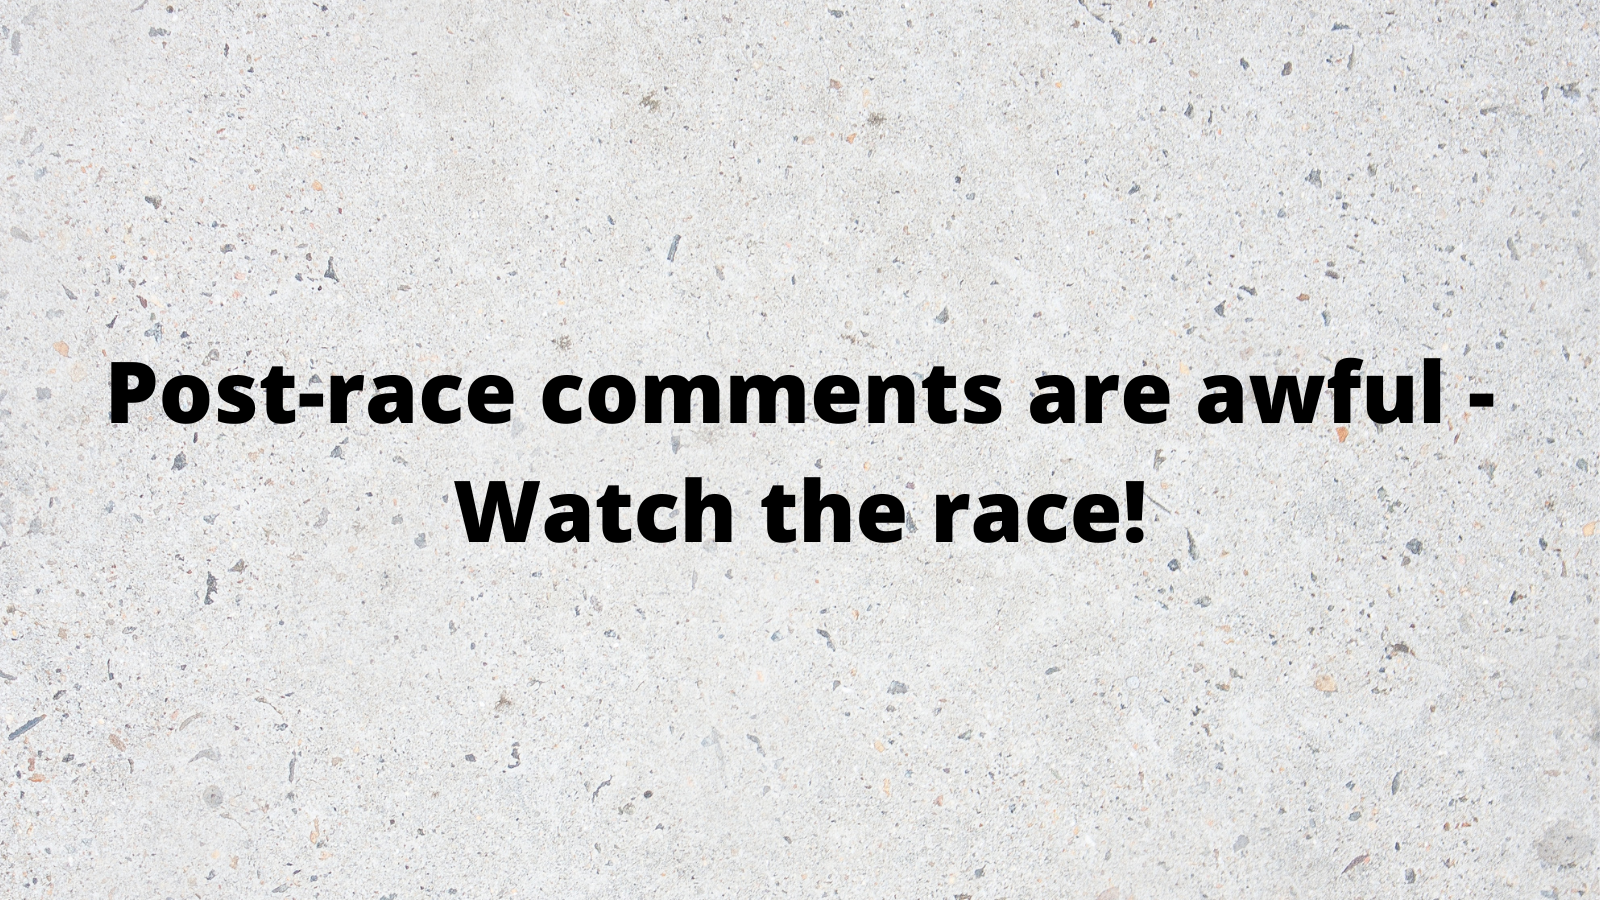 Post-race comments are awful - Watch the race!